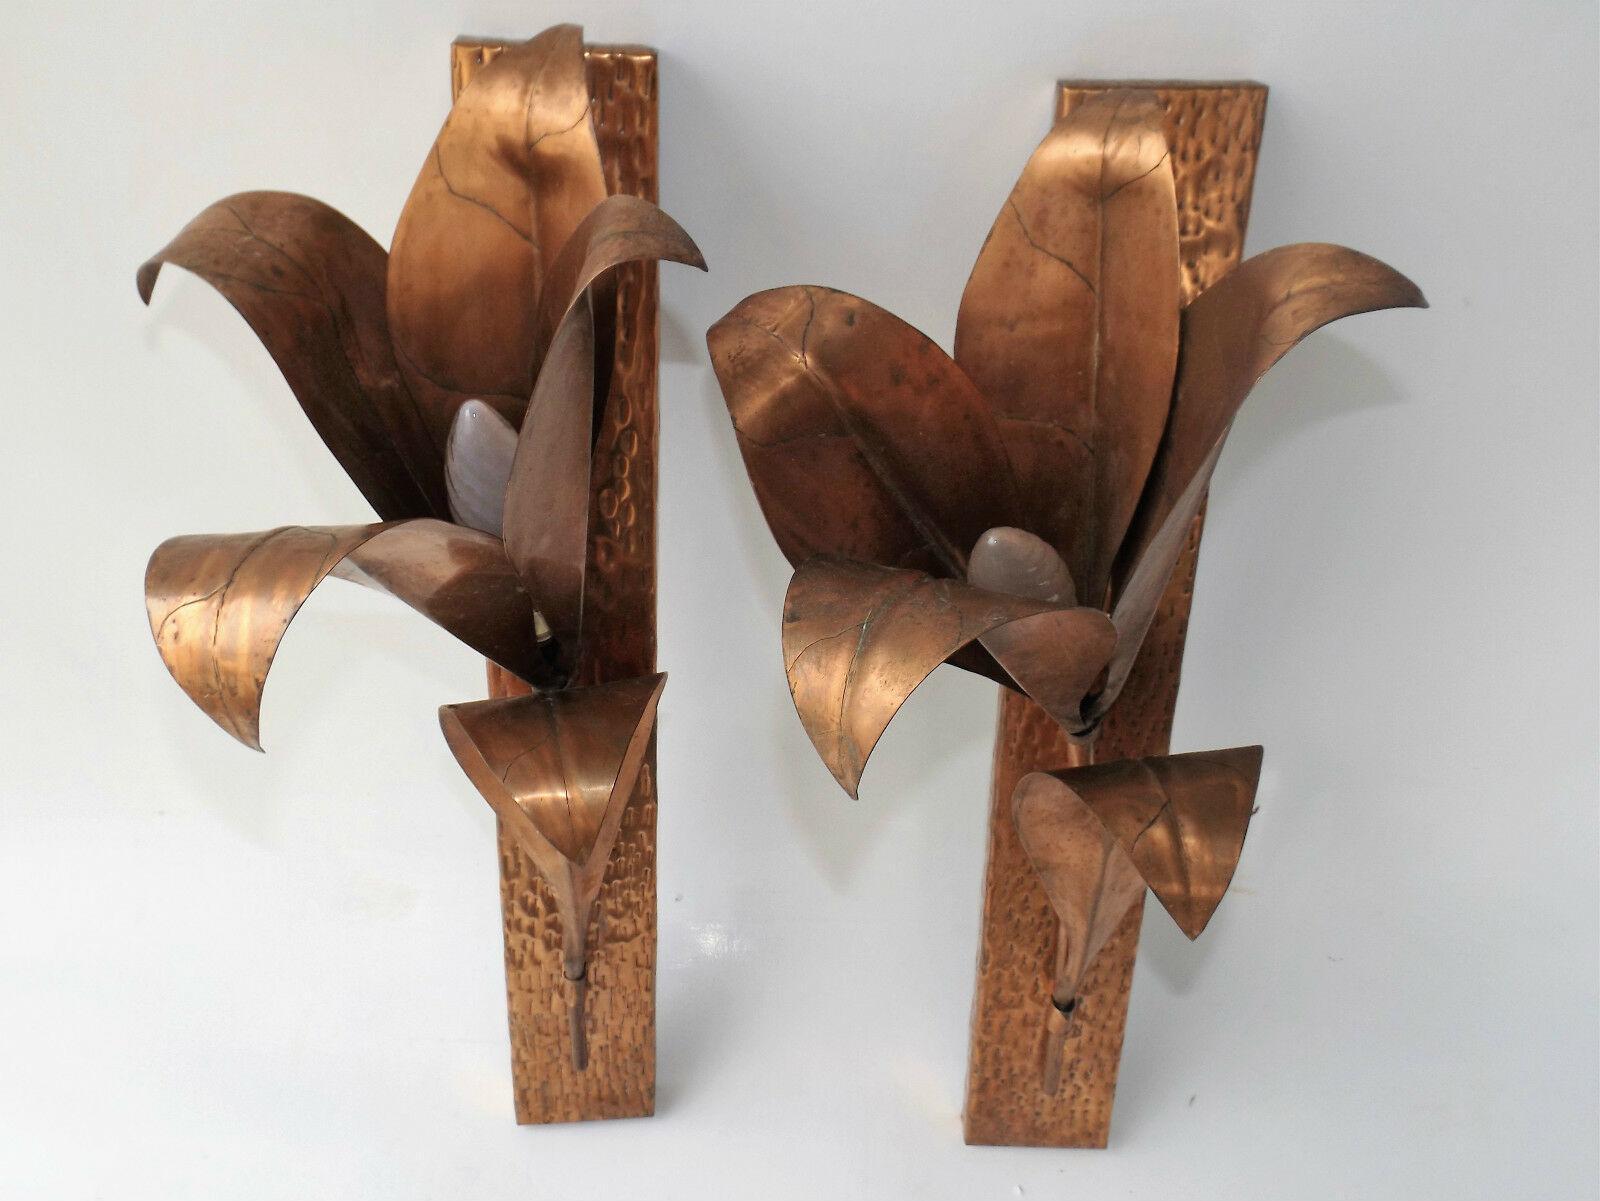 Spectacular Pair of Artisan Formed Copper Brutalist Lily Flower Form Wall Sconces. Attributed to Tommaso Barbi. Purchased at an Antique Fair in Italy.